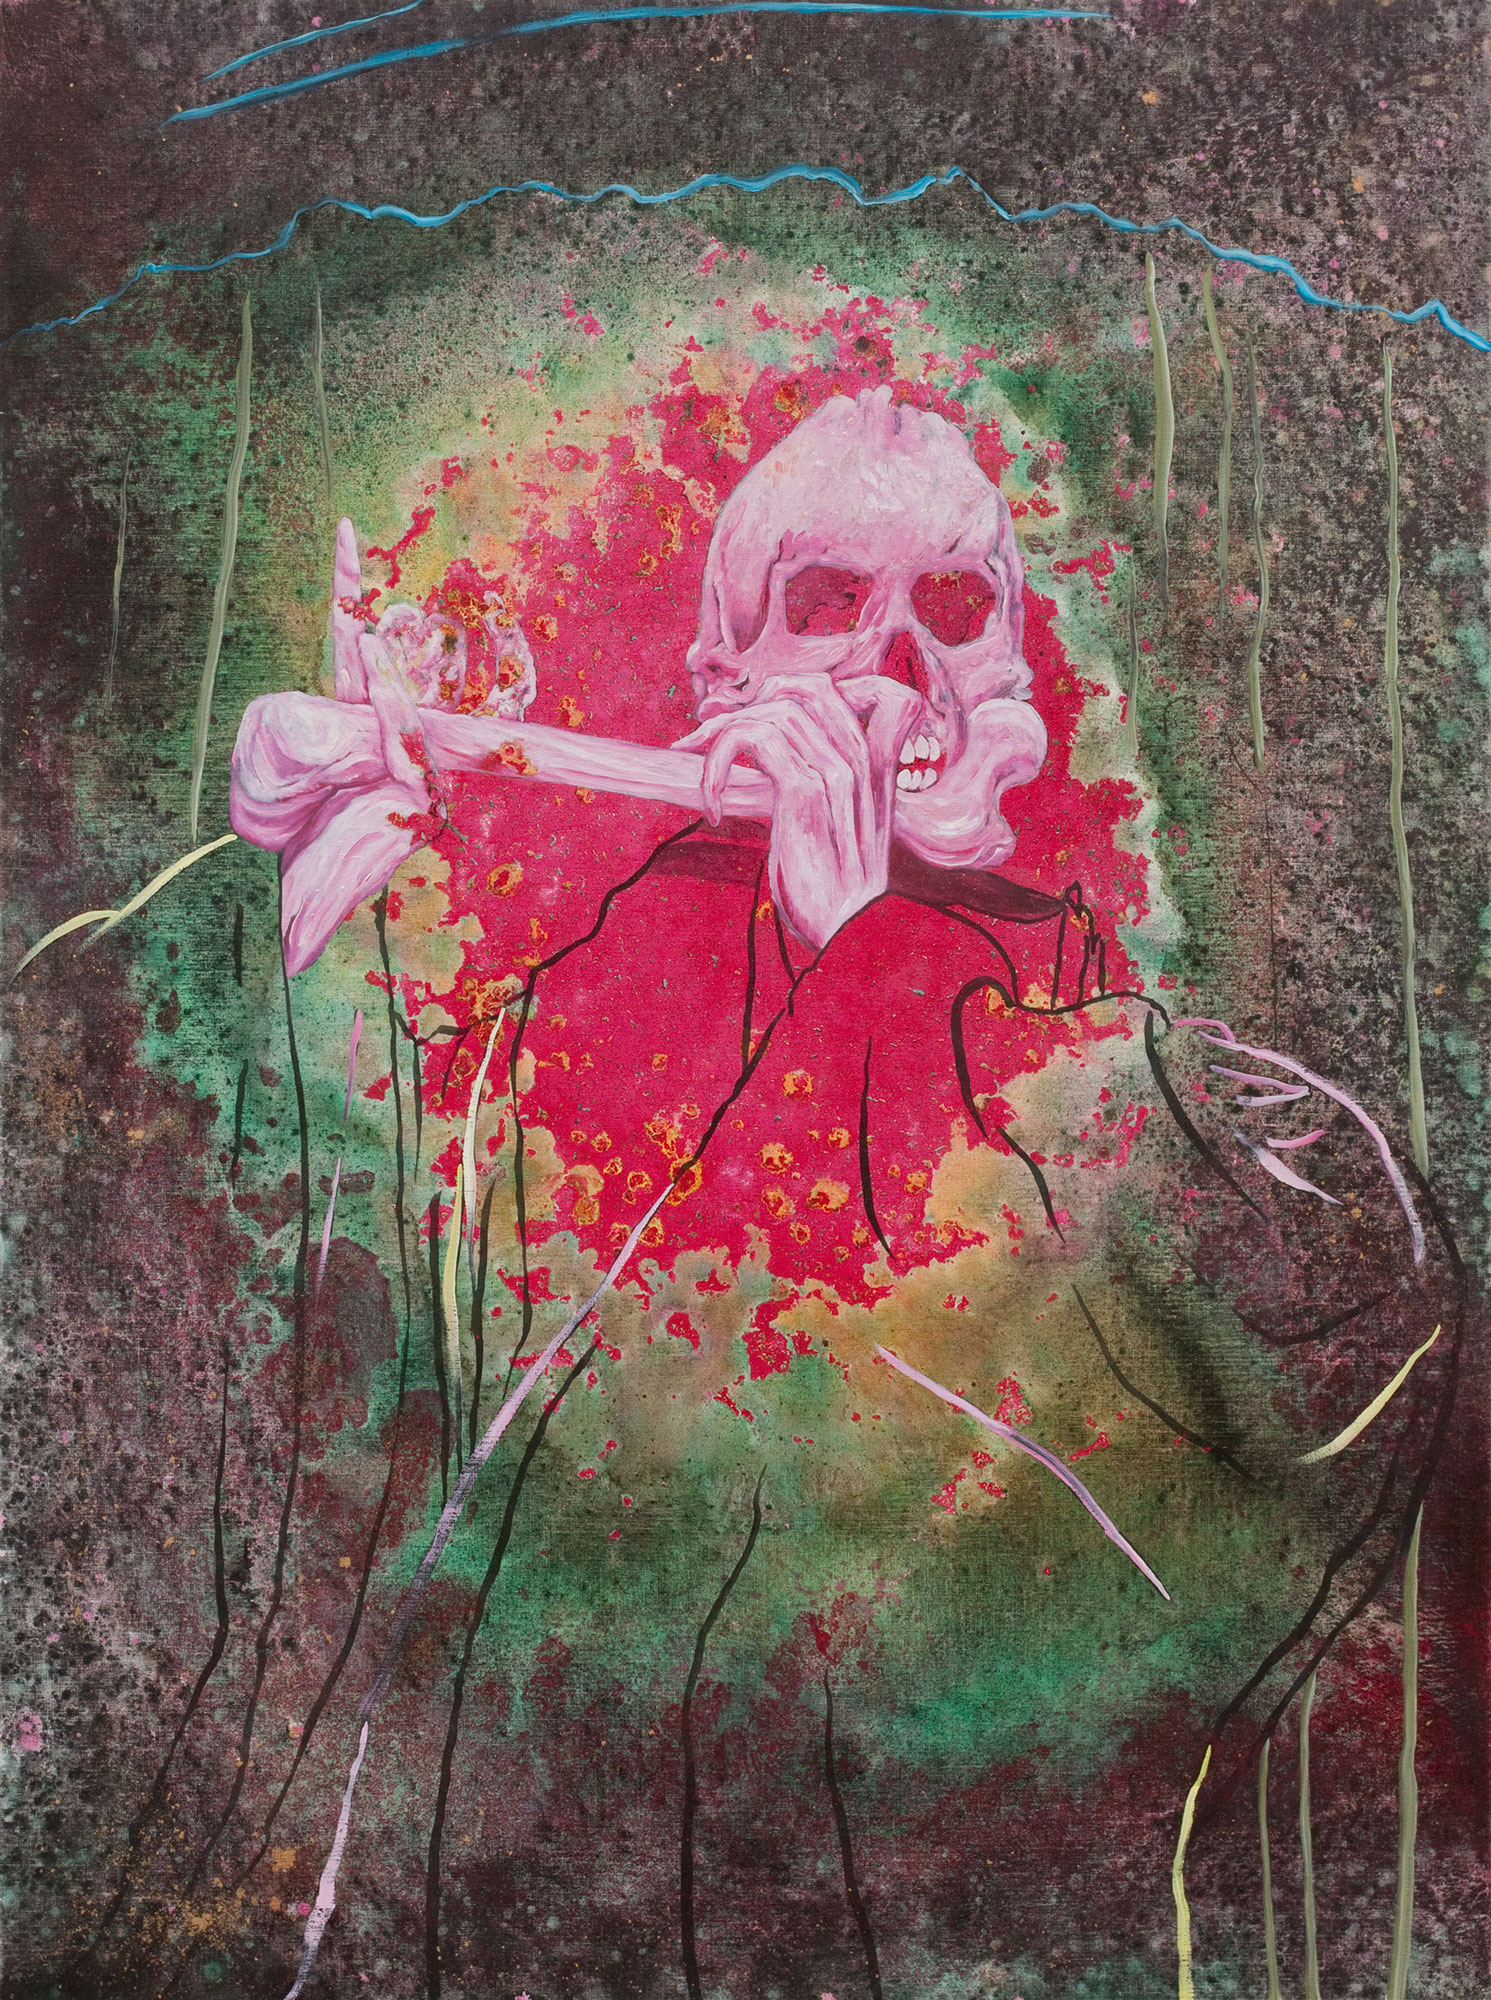 Wild Strawberries, Marc Molk, 2013, oil and acrylic on canvas, 51,2 x 38,2 in